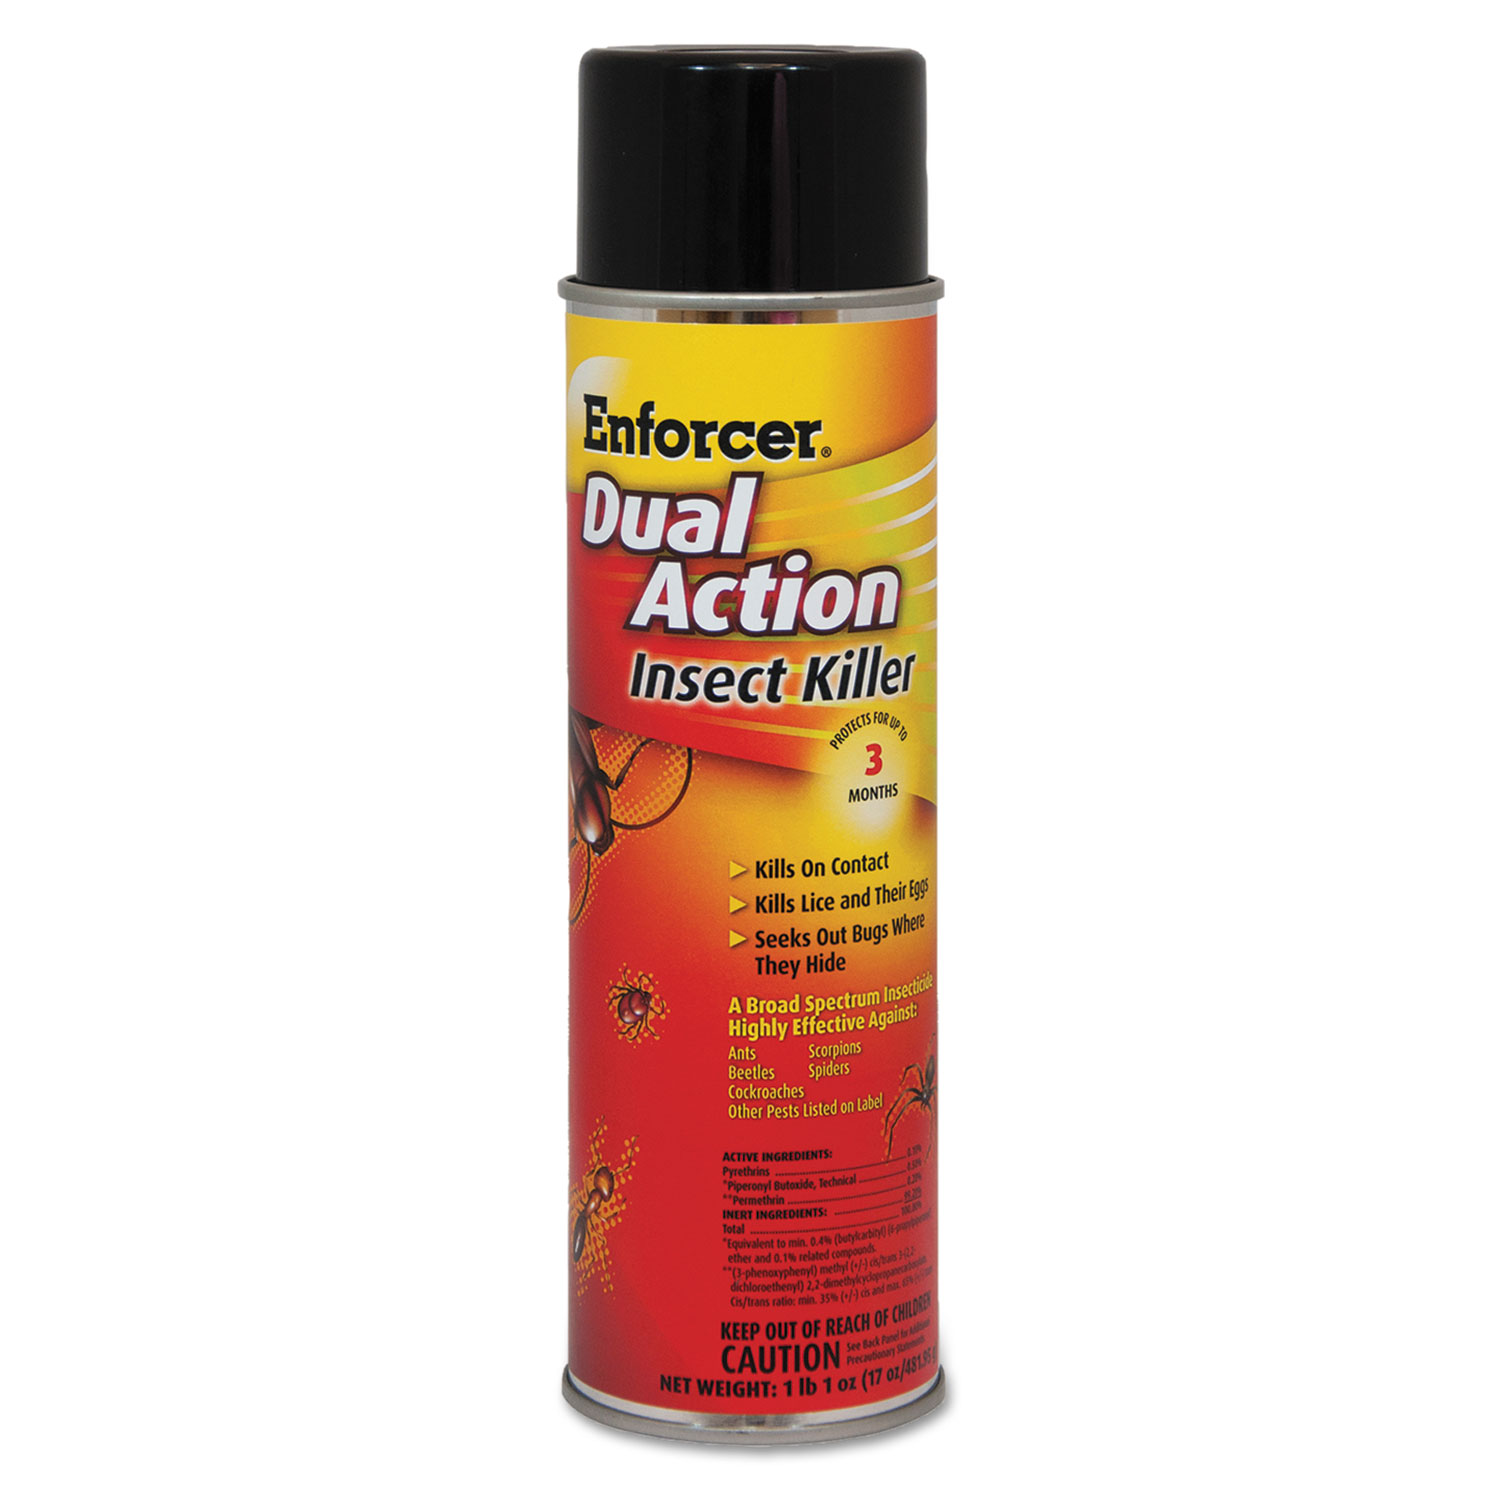  Enforcer 1047651 Dual Action Insect Killer, For Flying/Crawling Insects, 17 oz Aerosol (AMR1047651EA) 